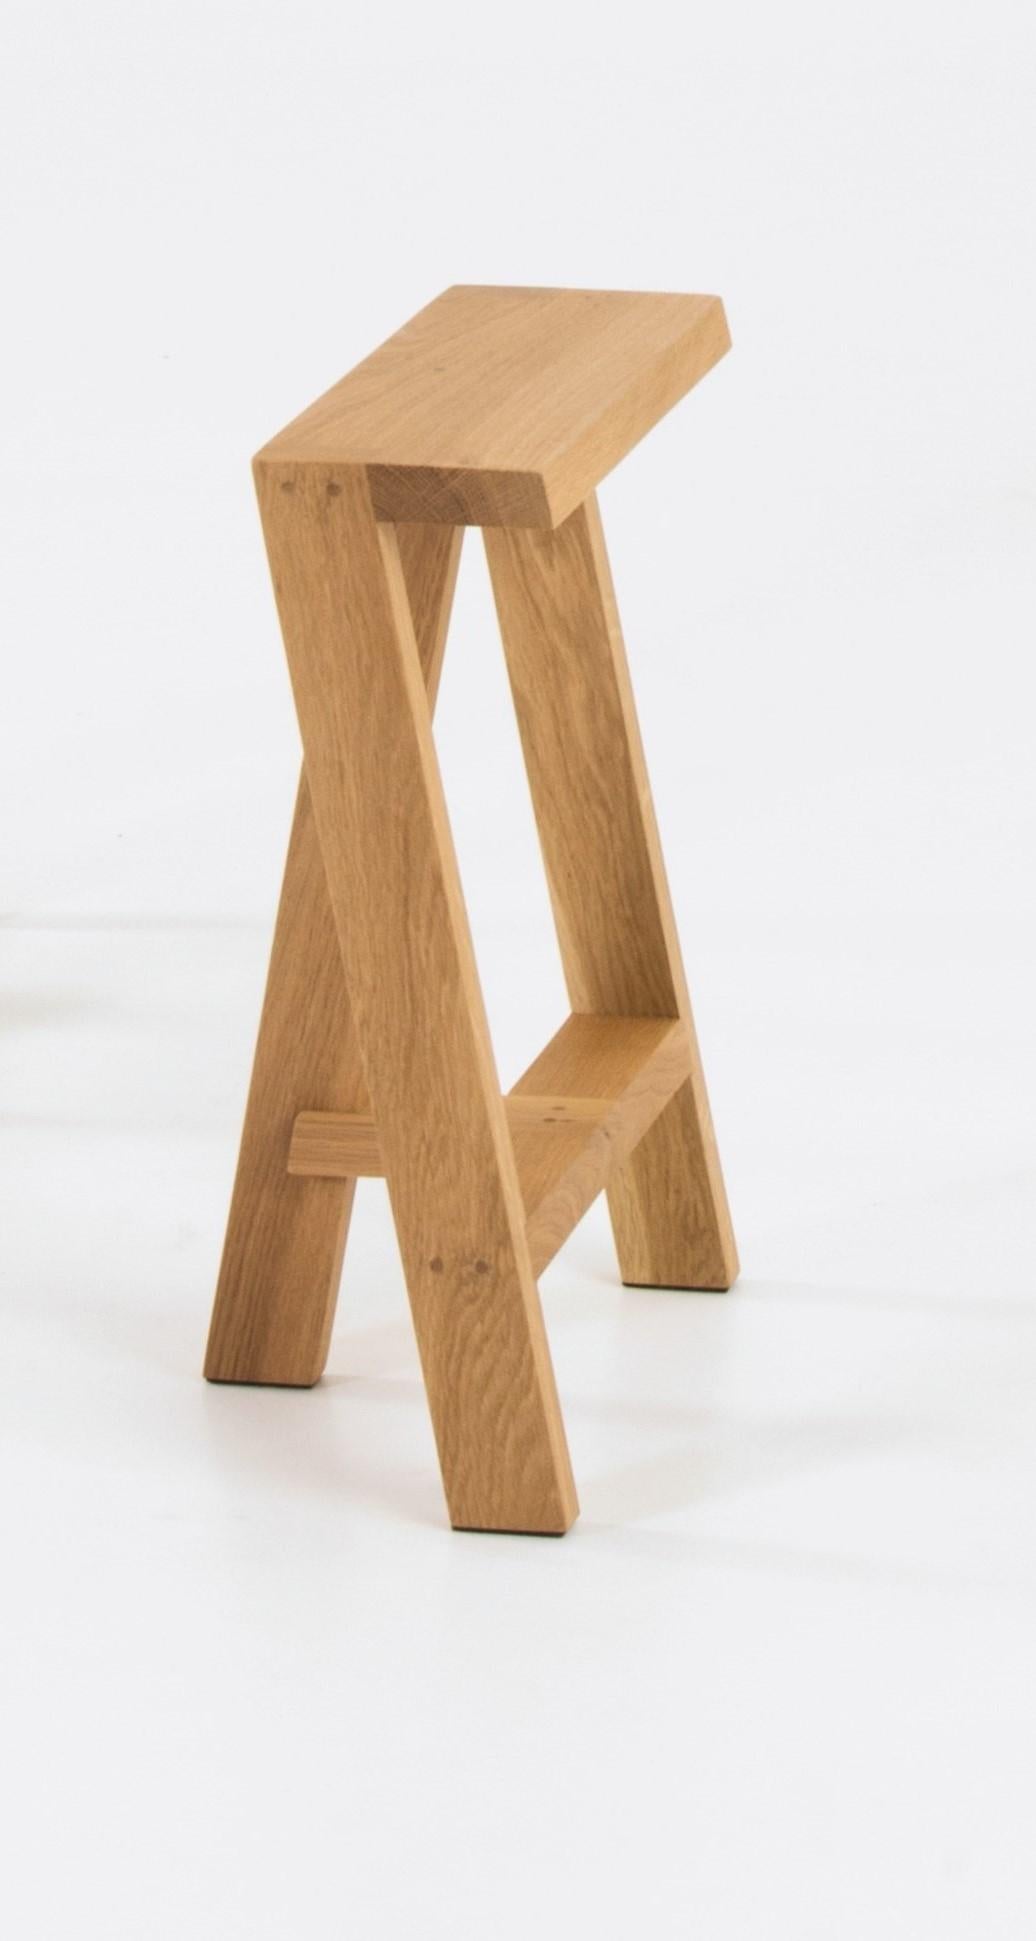 Set of 2 Small Pausa oak stool by Pierre-Emmanuel Vandeputte
Dimensions: D 20 x W 35 x H 45 cm
Materials: oak wood
Available in burnt oak version and in 3 sizes.

Pausa is a series of stools; 45cm, 65cm, or 80cm of assembled oak pieces. 
The